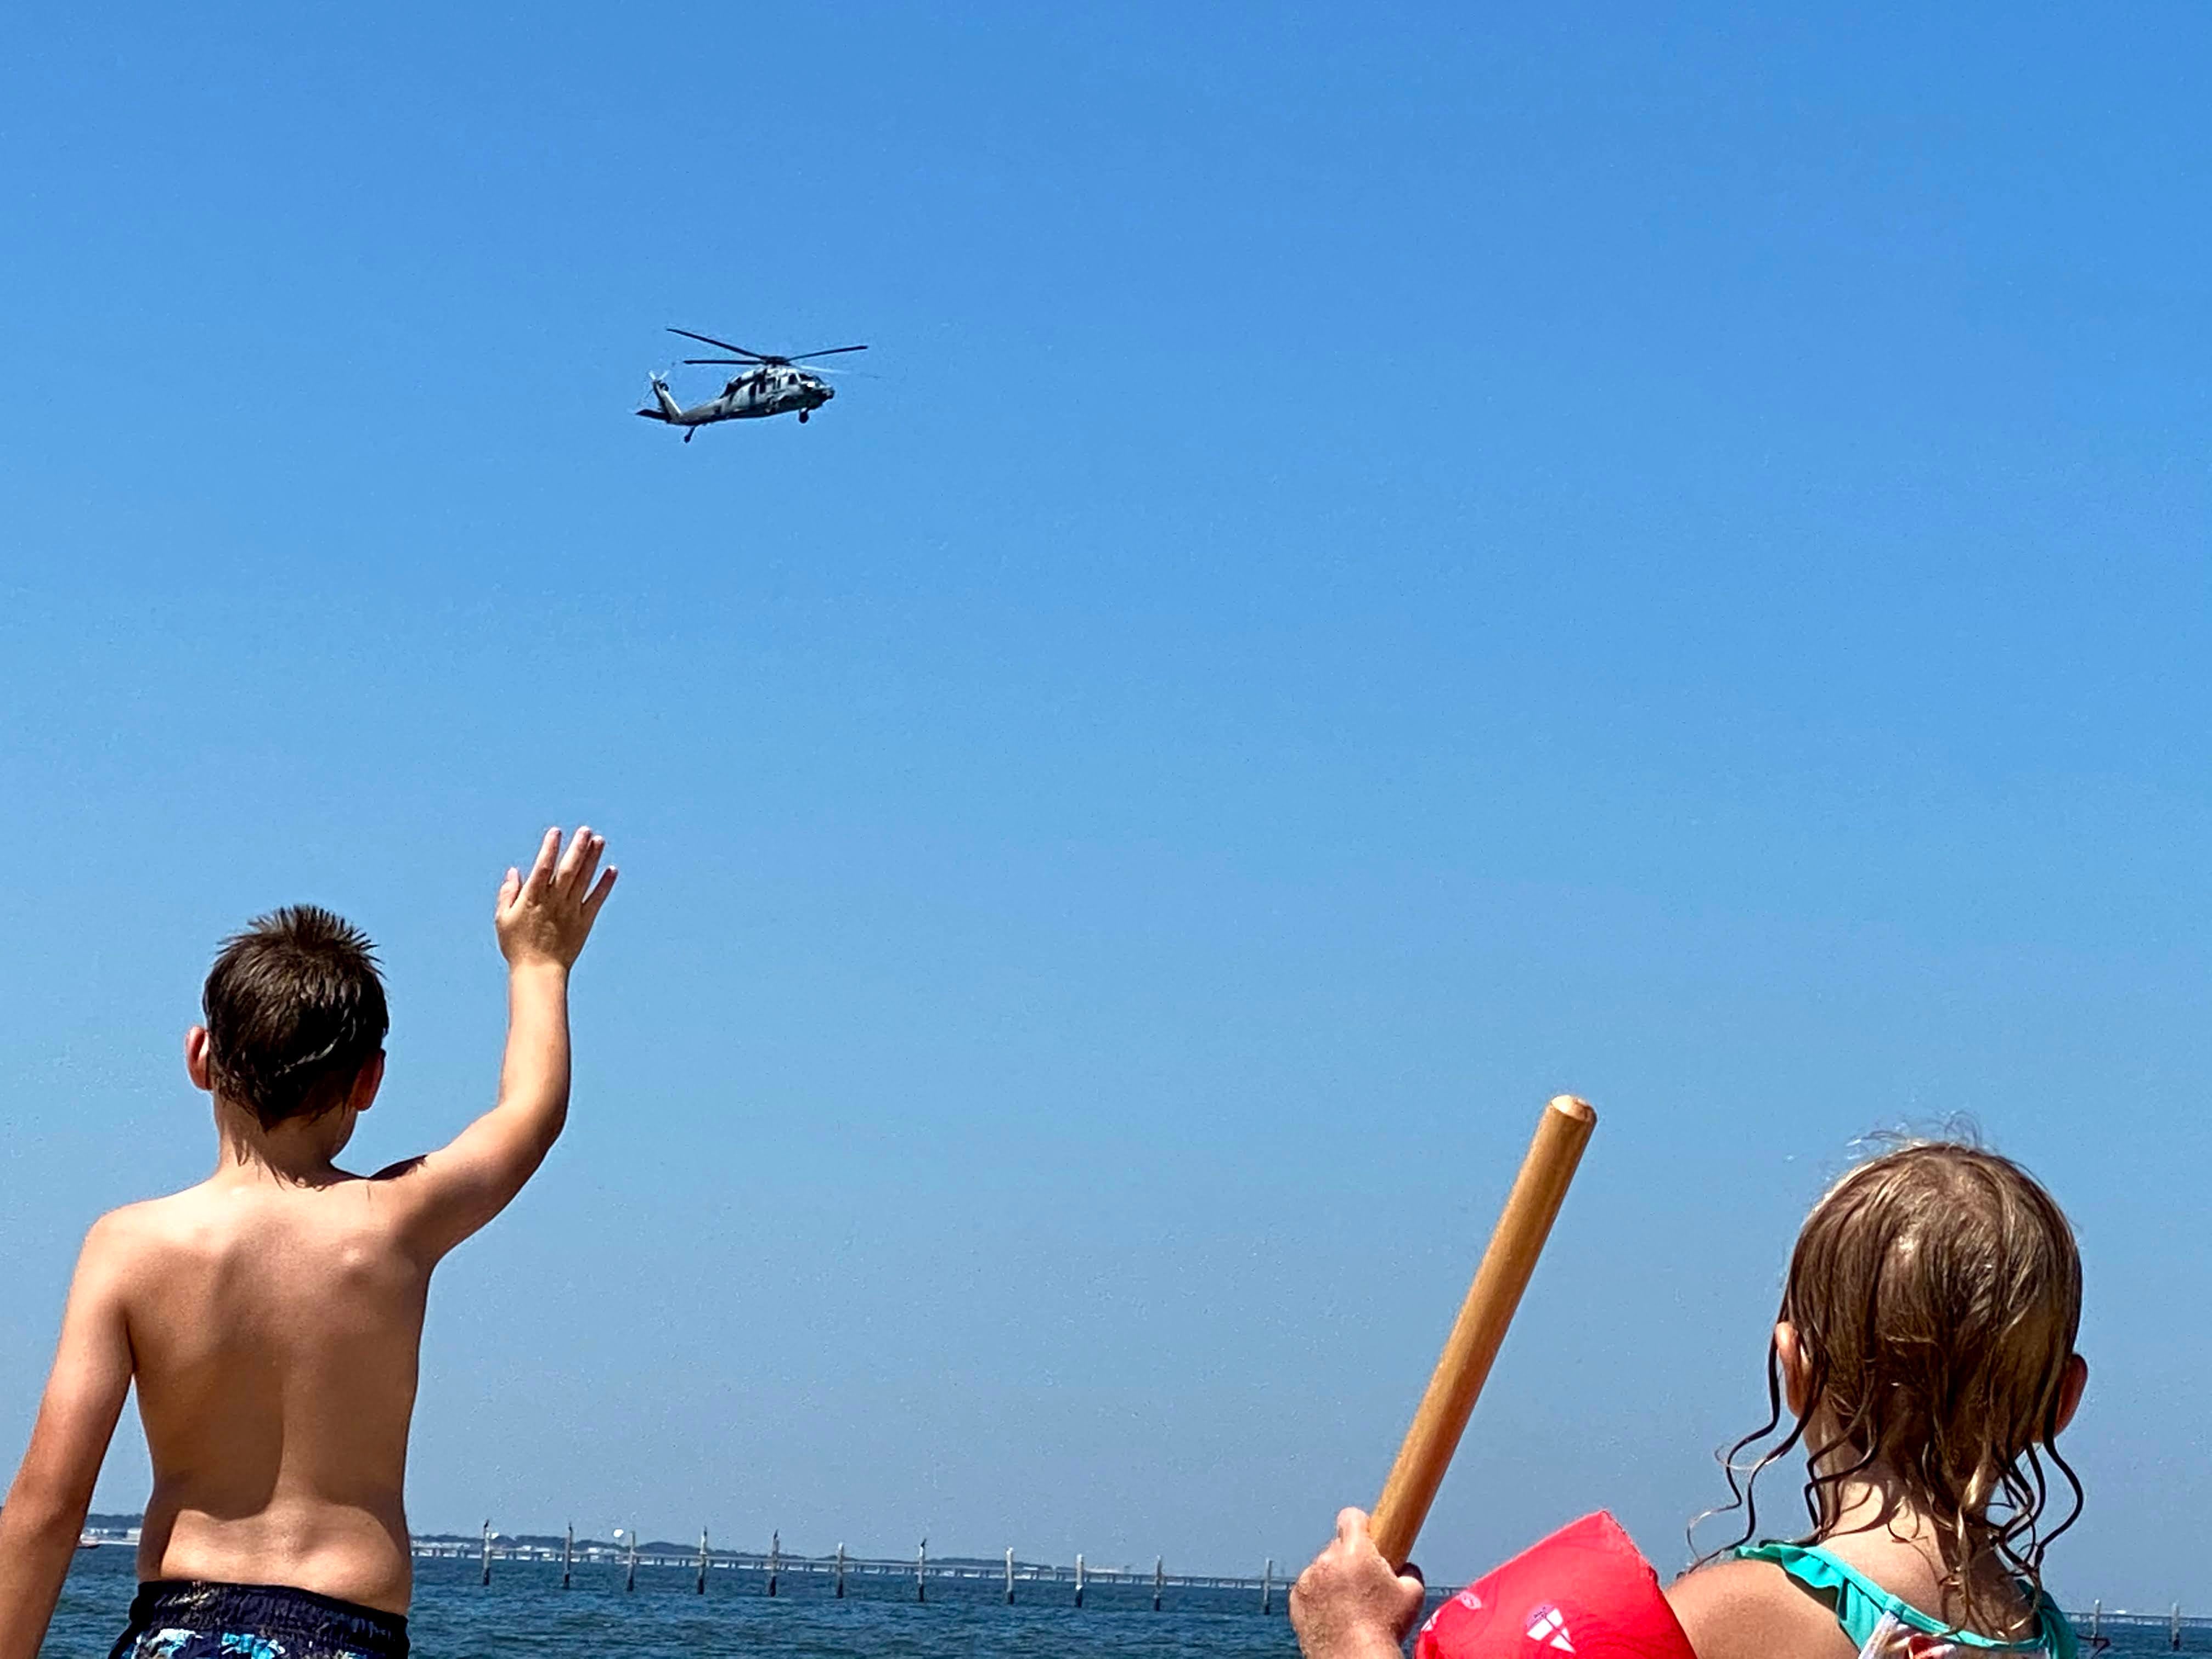 Few fly overs and ships passing by.  Kids loved it.